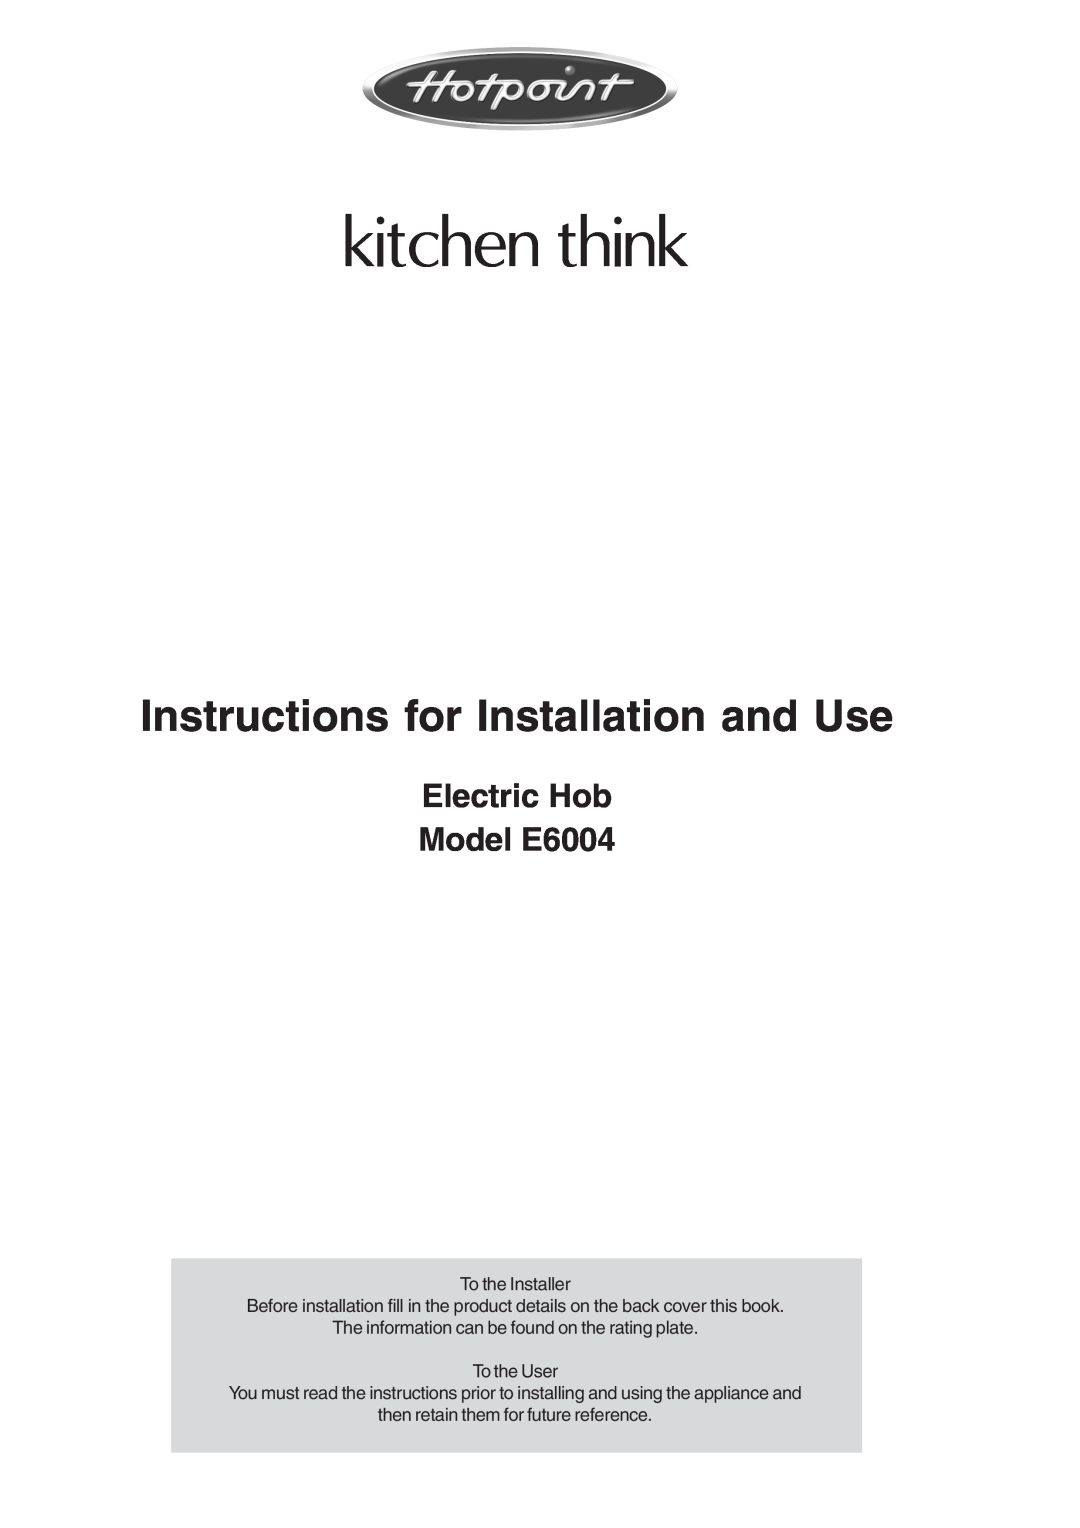 Hotpoint manual Electric Hob Model E6004, kitchen think, Instructions for Installation and Use 